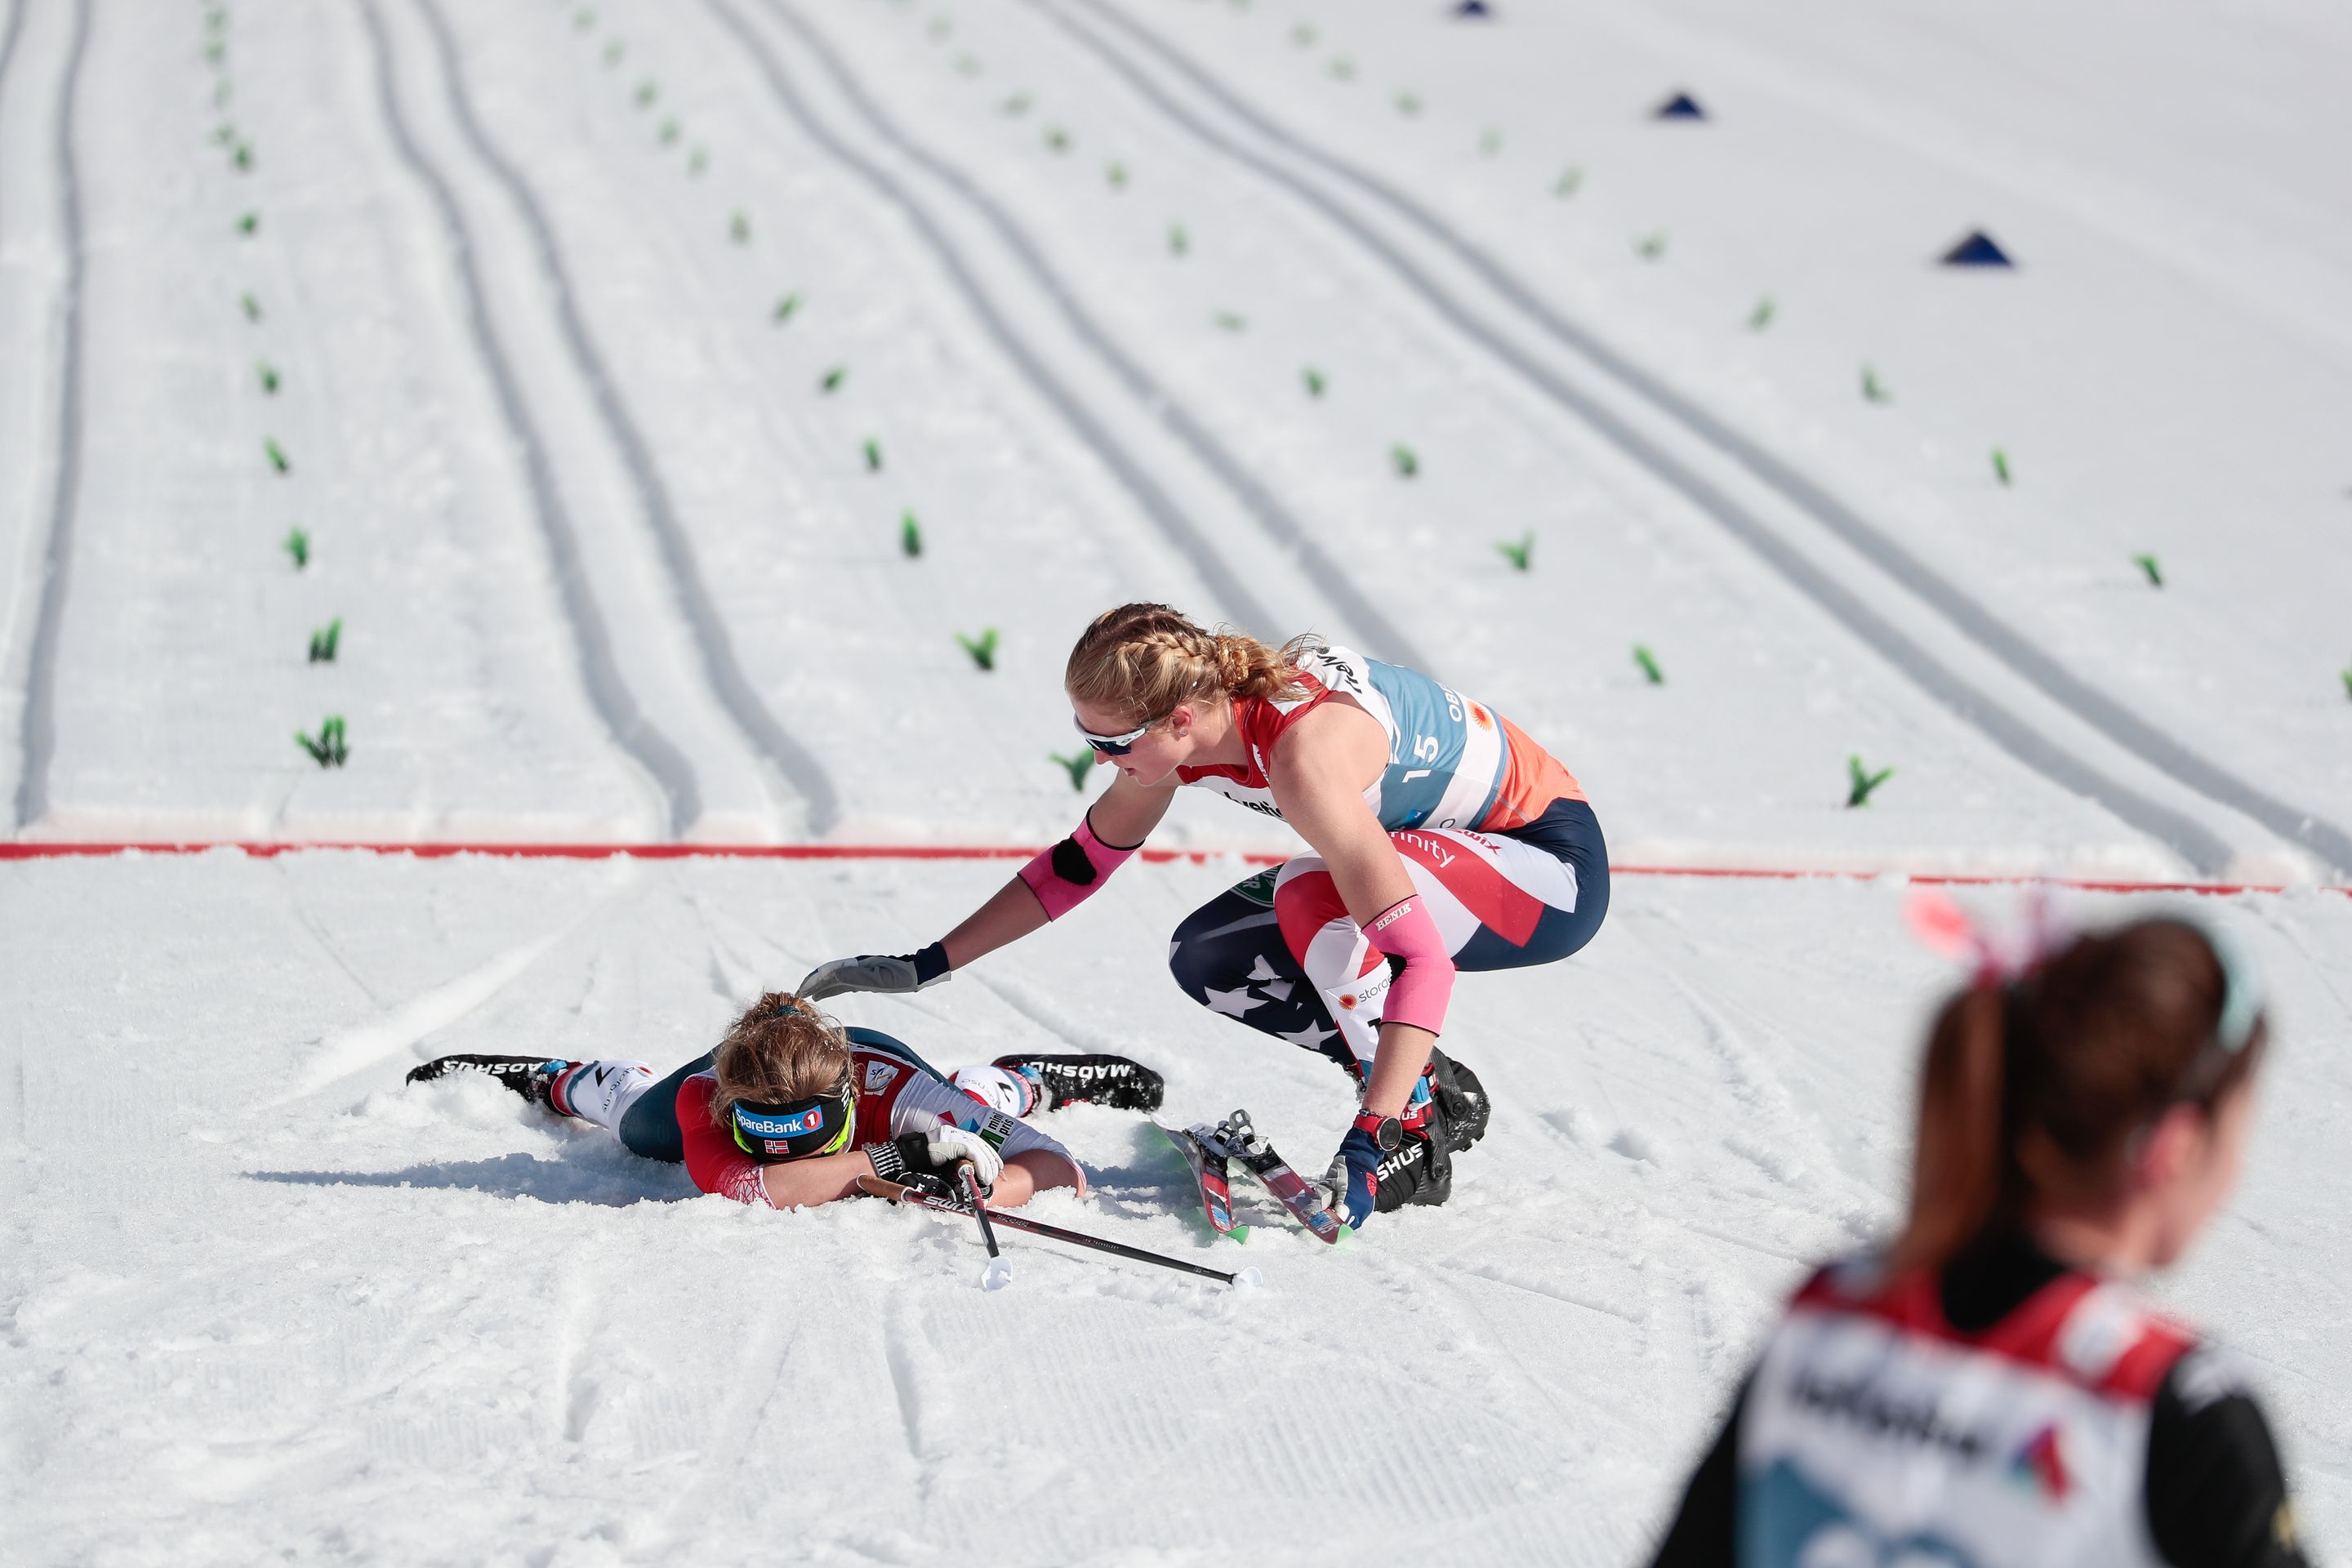 Hailey checking on Marie Helene Fossesholm after the finish line of Oberstdorf's 30km Mst | Image by NordicFocus